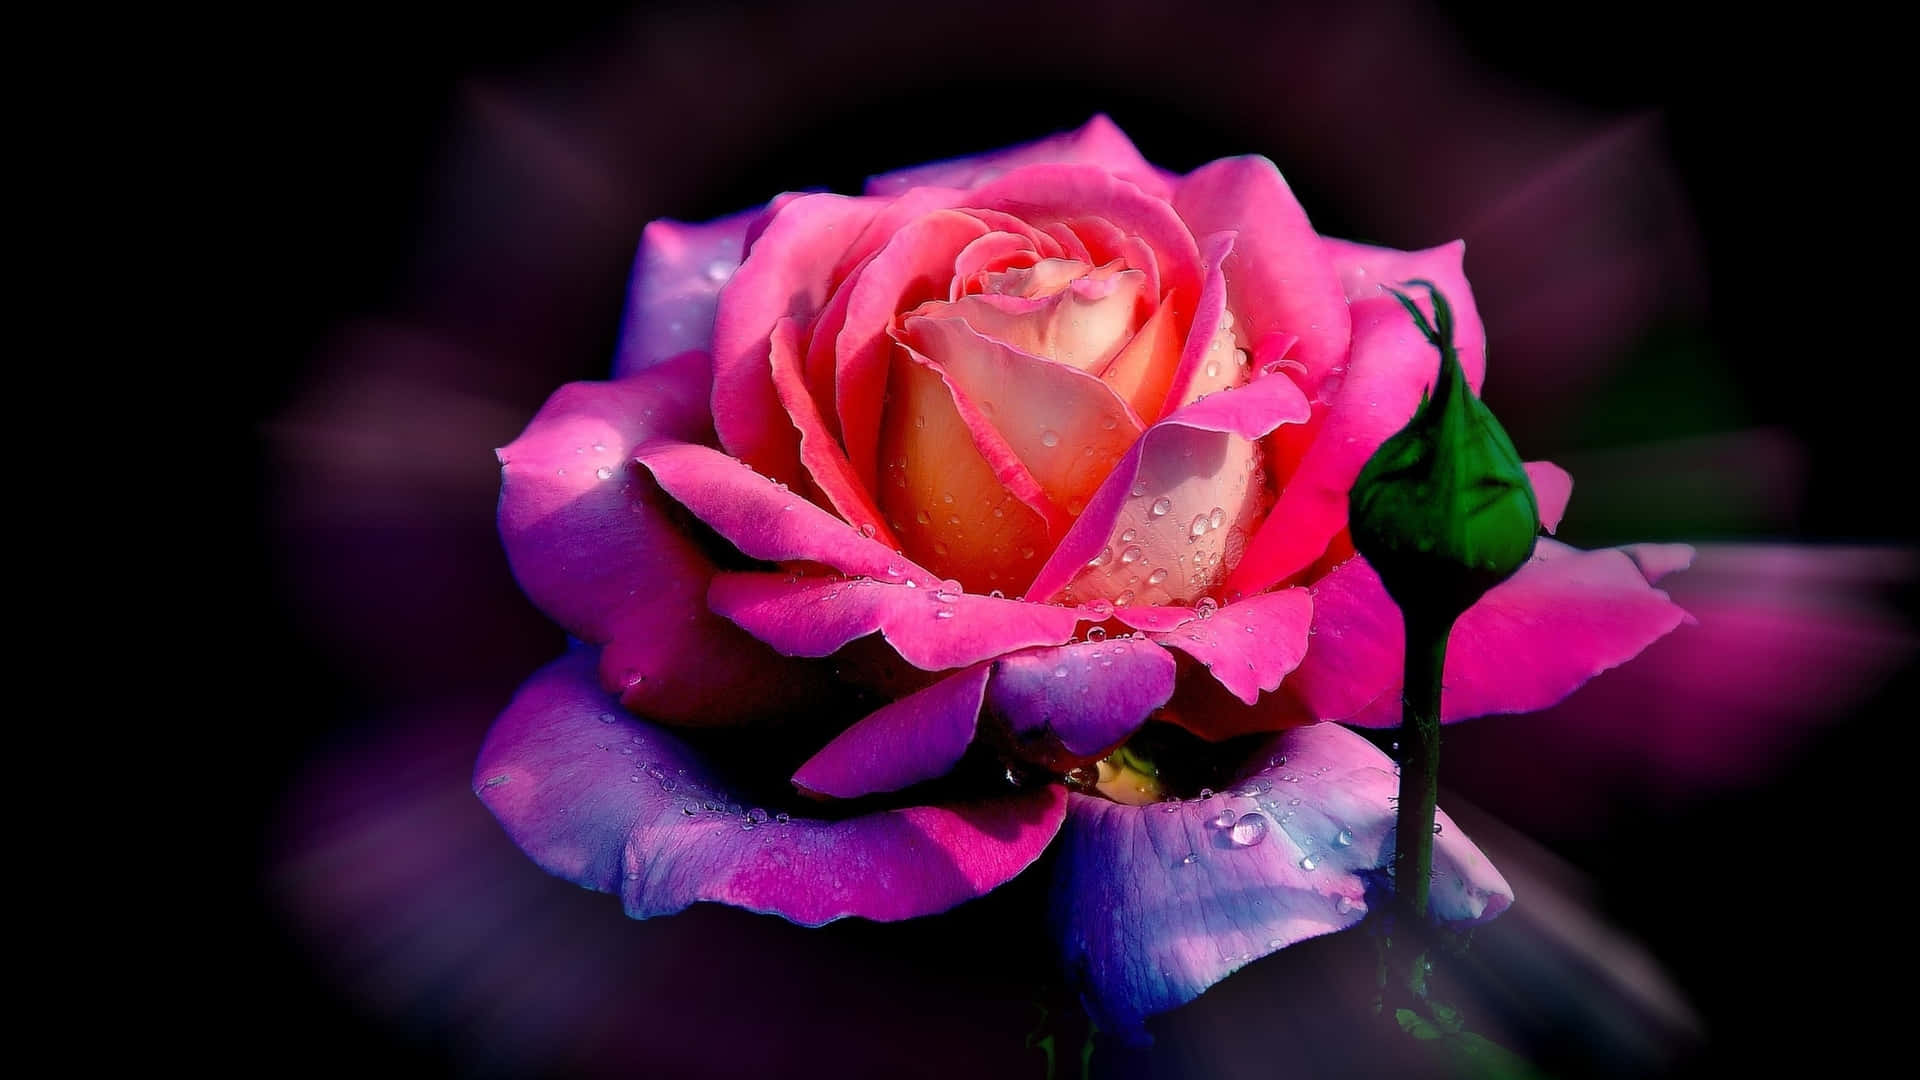 A Pink Rose With Water Droplets On It Wallpaper